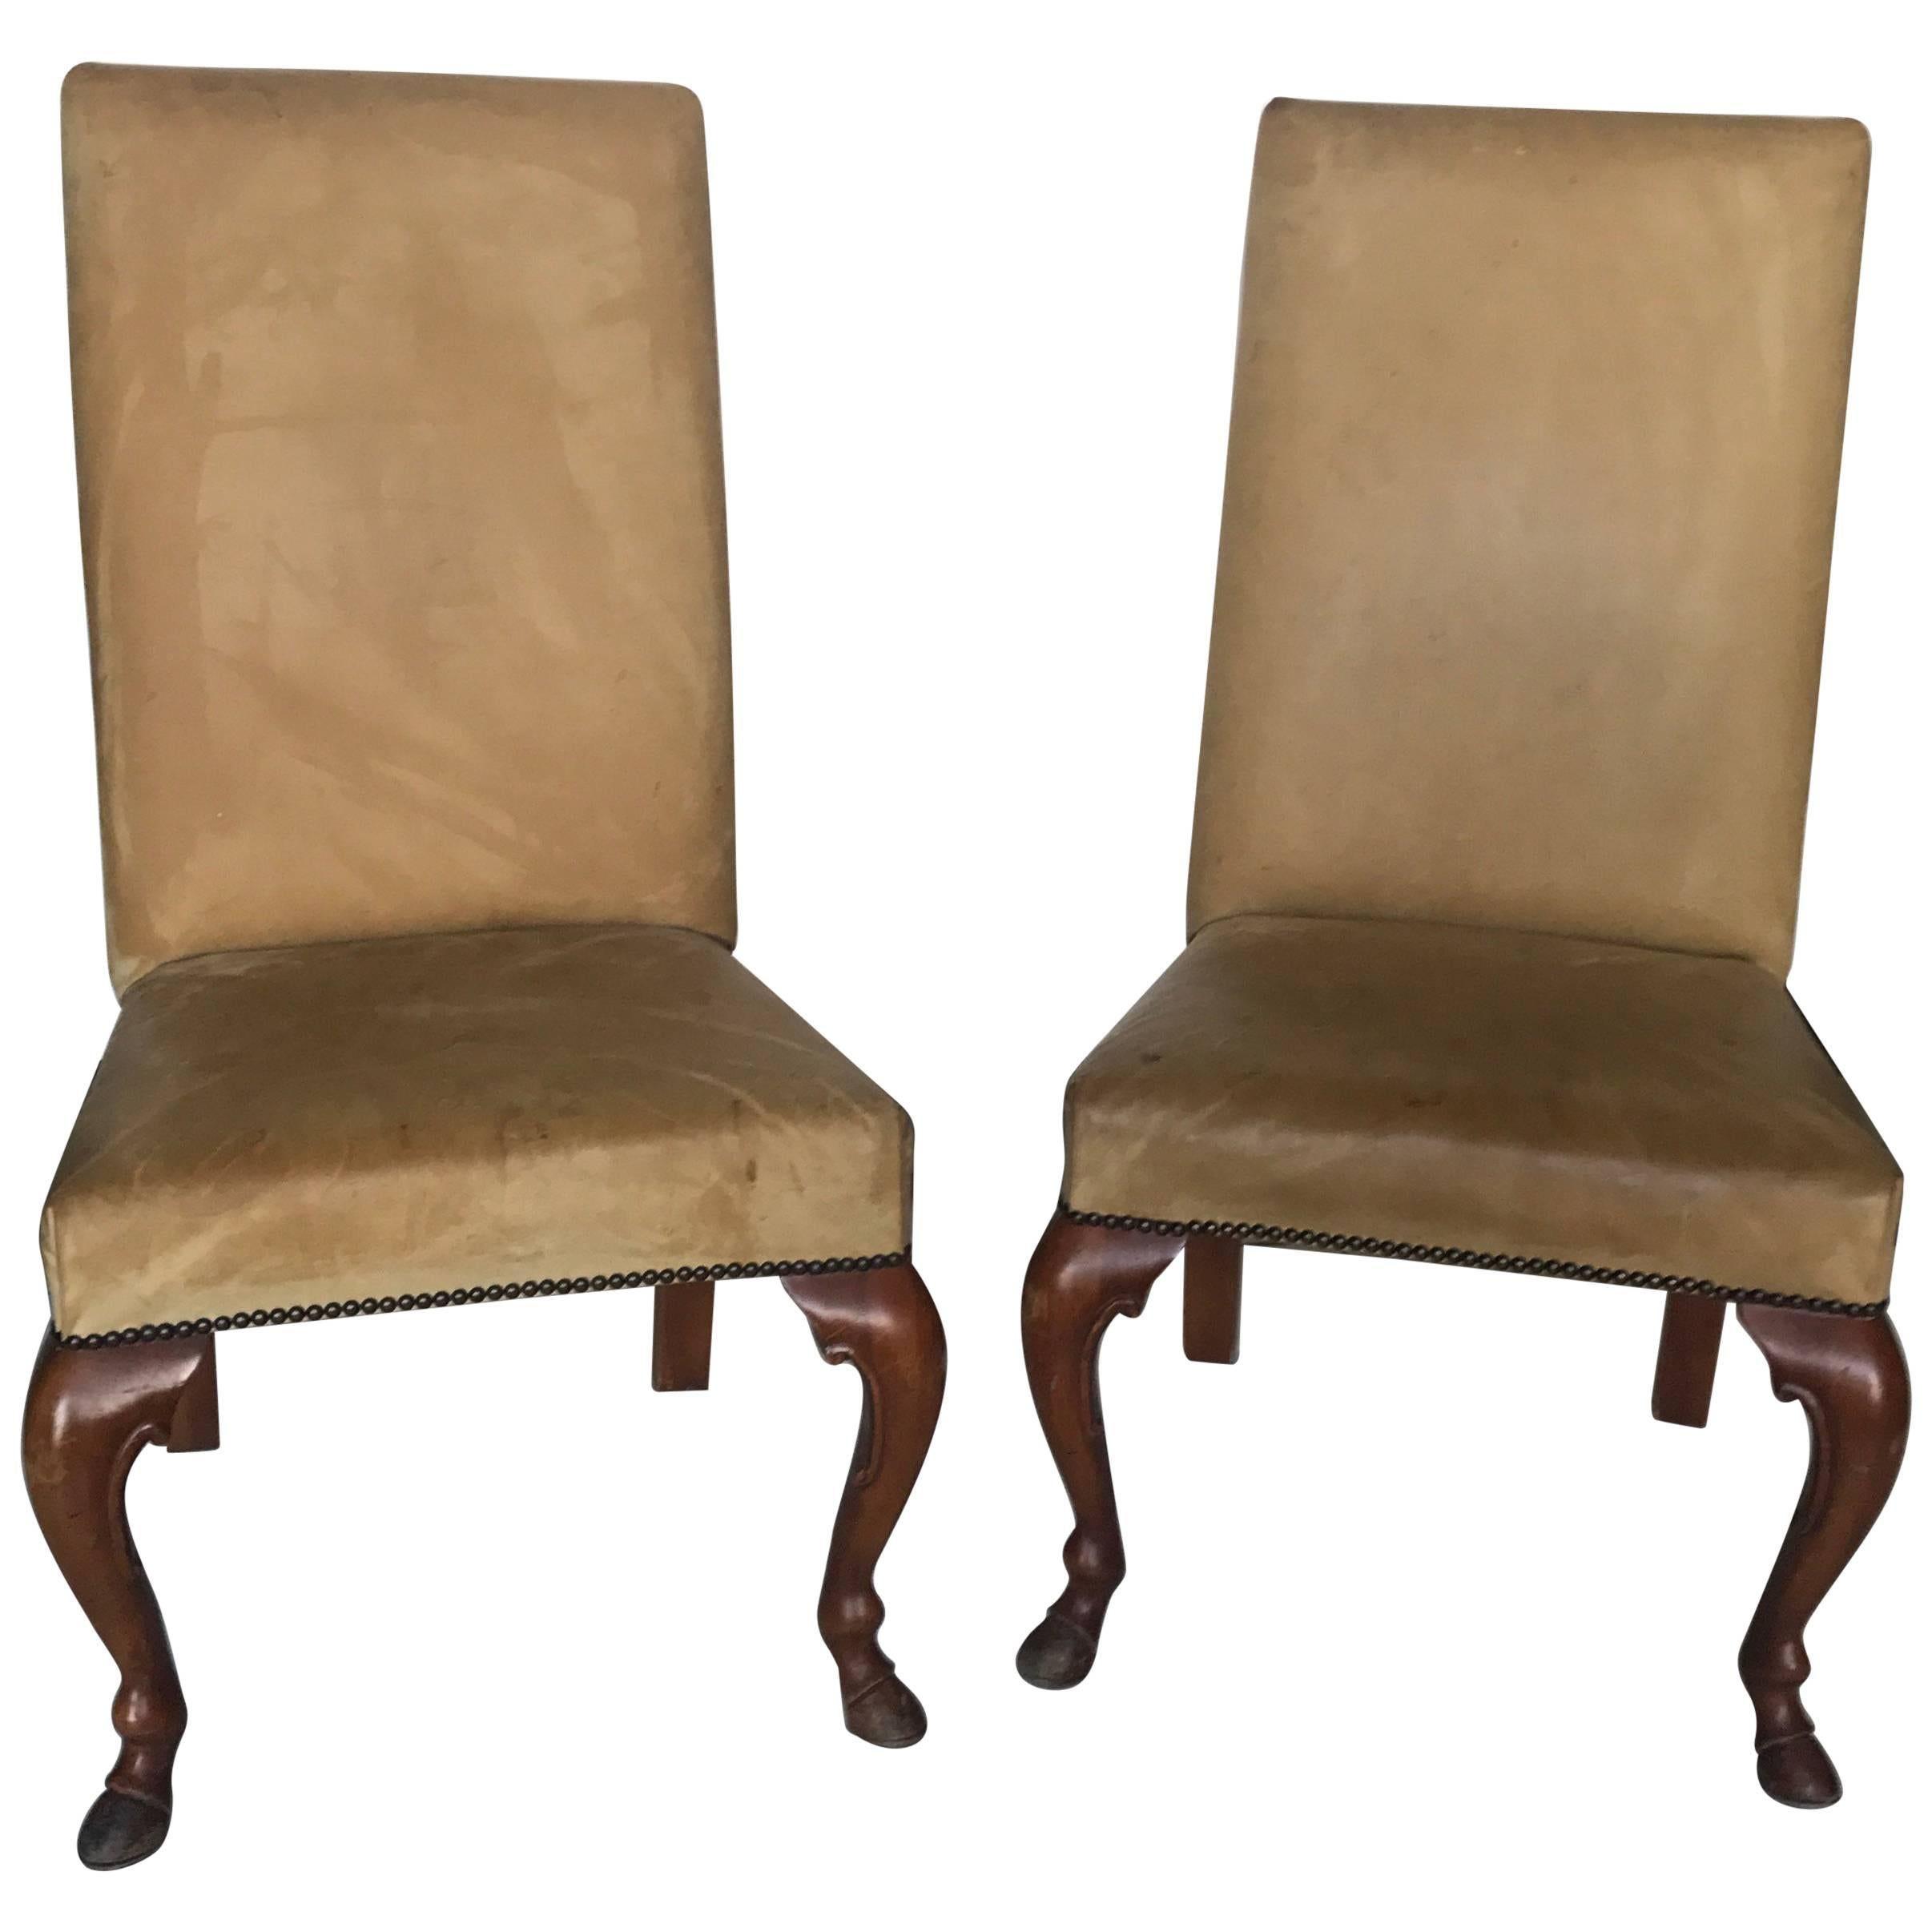 Pear of Ralph Lauren Chairs in Leather, Labelled For Sale